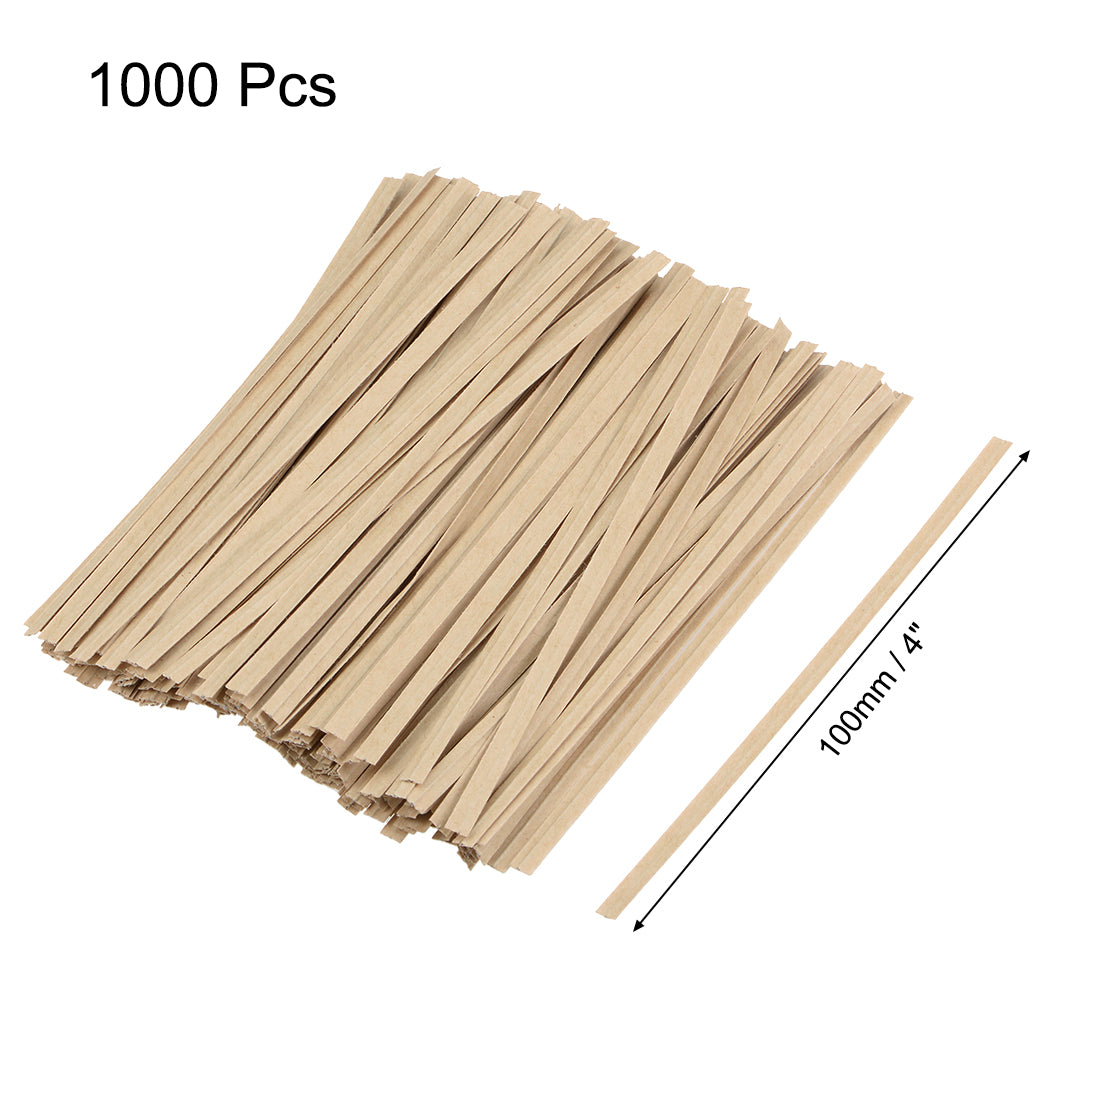 uxcell Uxcell Long Strong Twist Ties 4 Inches Quality  Closure Tie for Tying Gift Bags Art Craft Ties Manage Cords Khaki 1000pcs